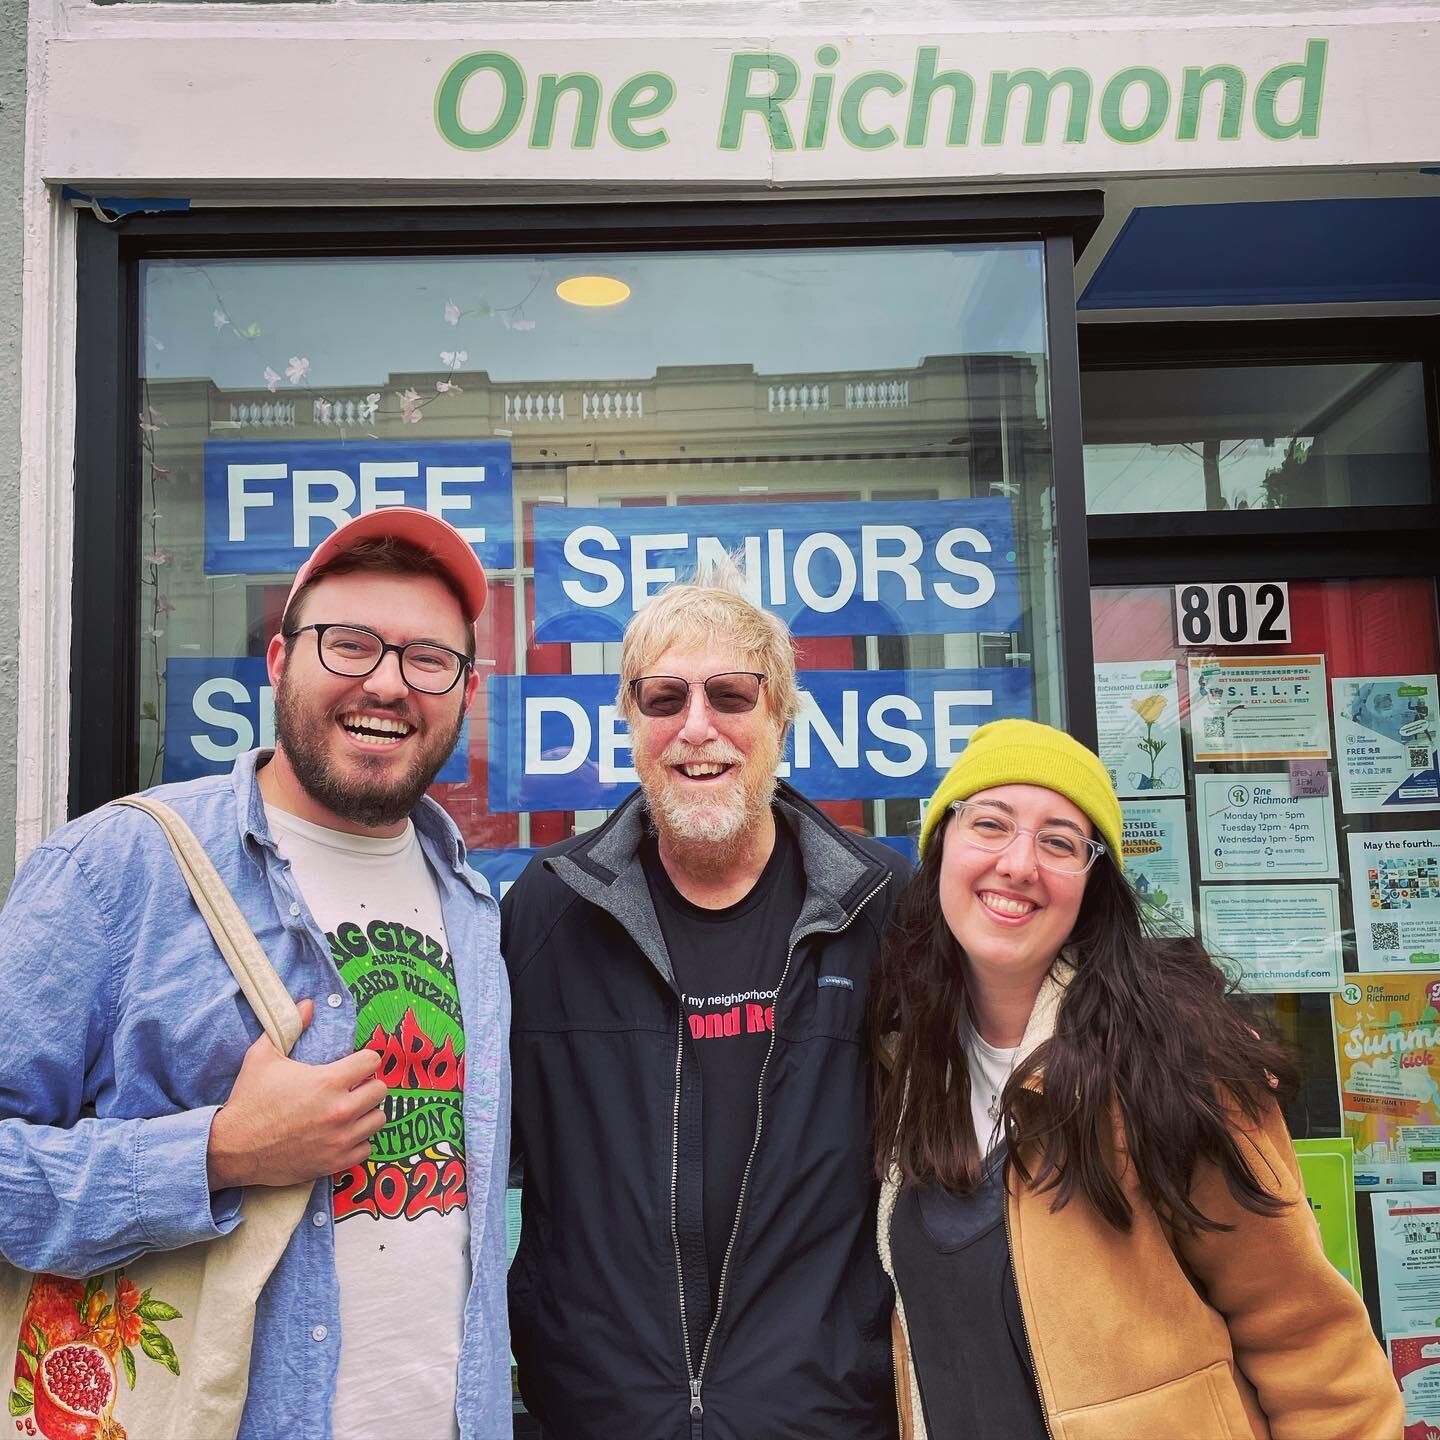 Austin and Becca from the Inner Richmond swung by and met the editor of @richmondsunsetnews 
We love to see neighbors at our monthly Meet the Editor sessions. 👋📸

#onerichmondsf #innerrichmonddistrict #richmonddistrict #innerrichmondsf #therichmond